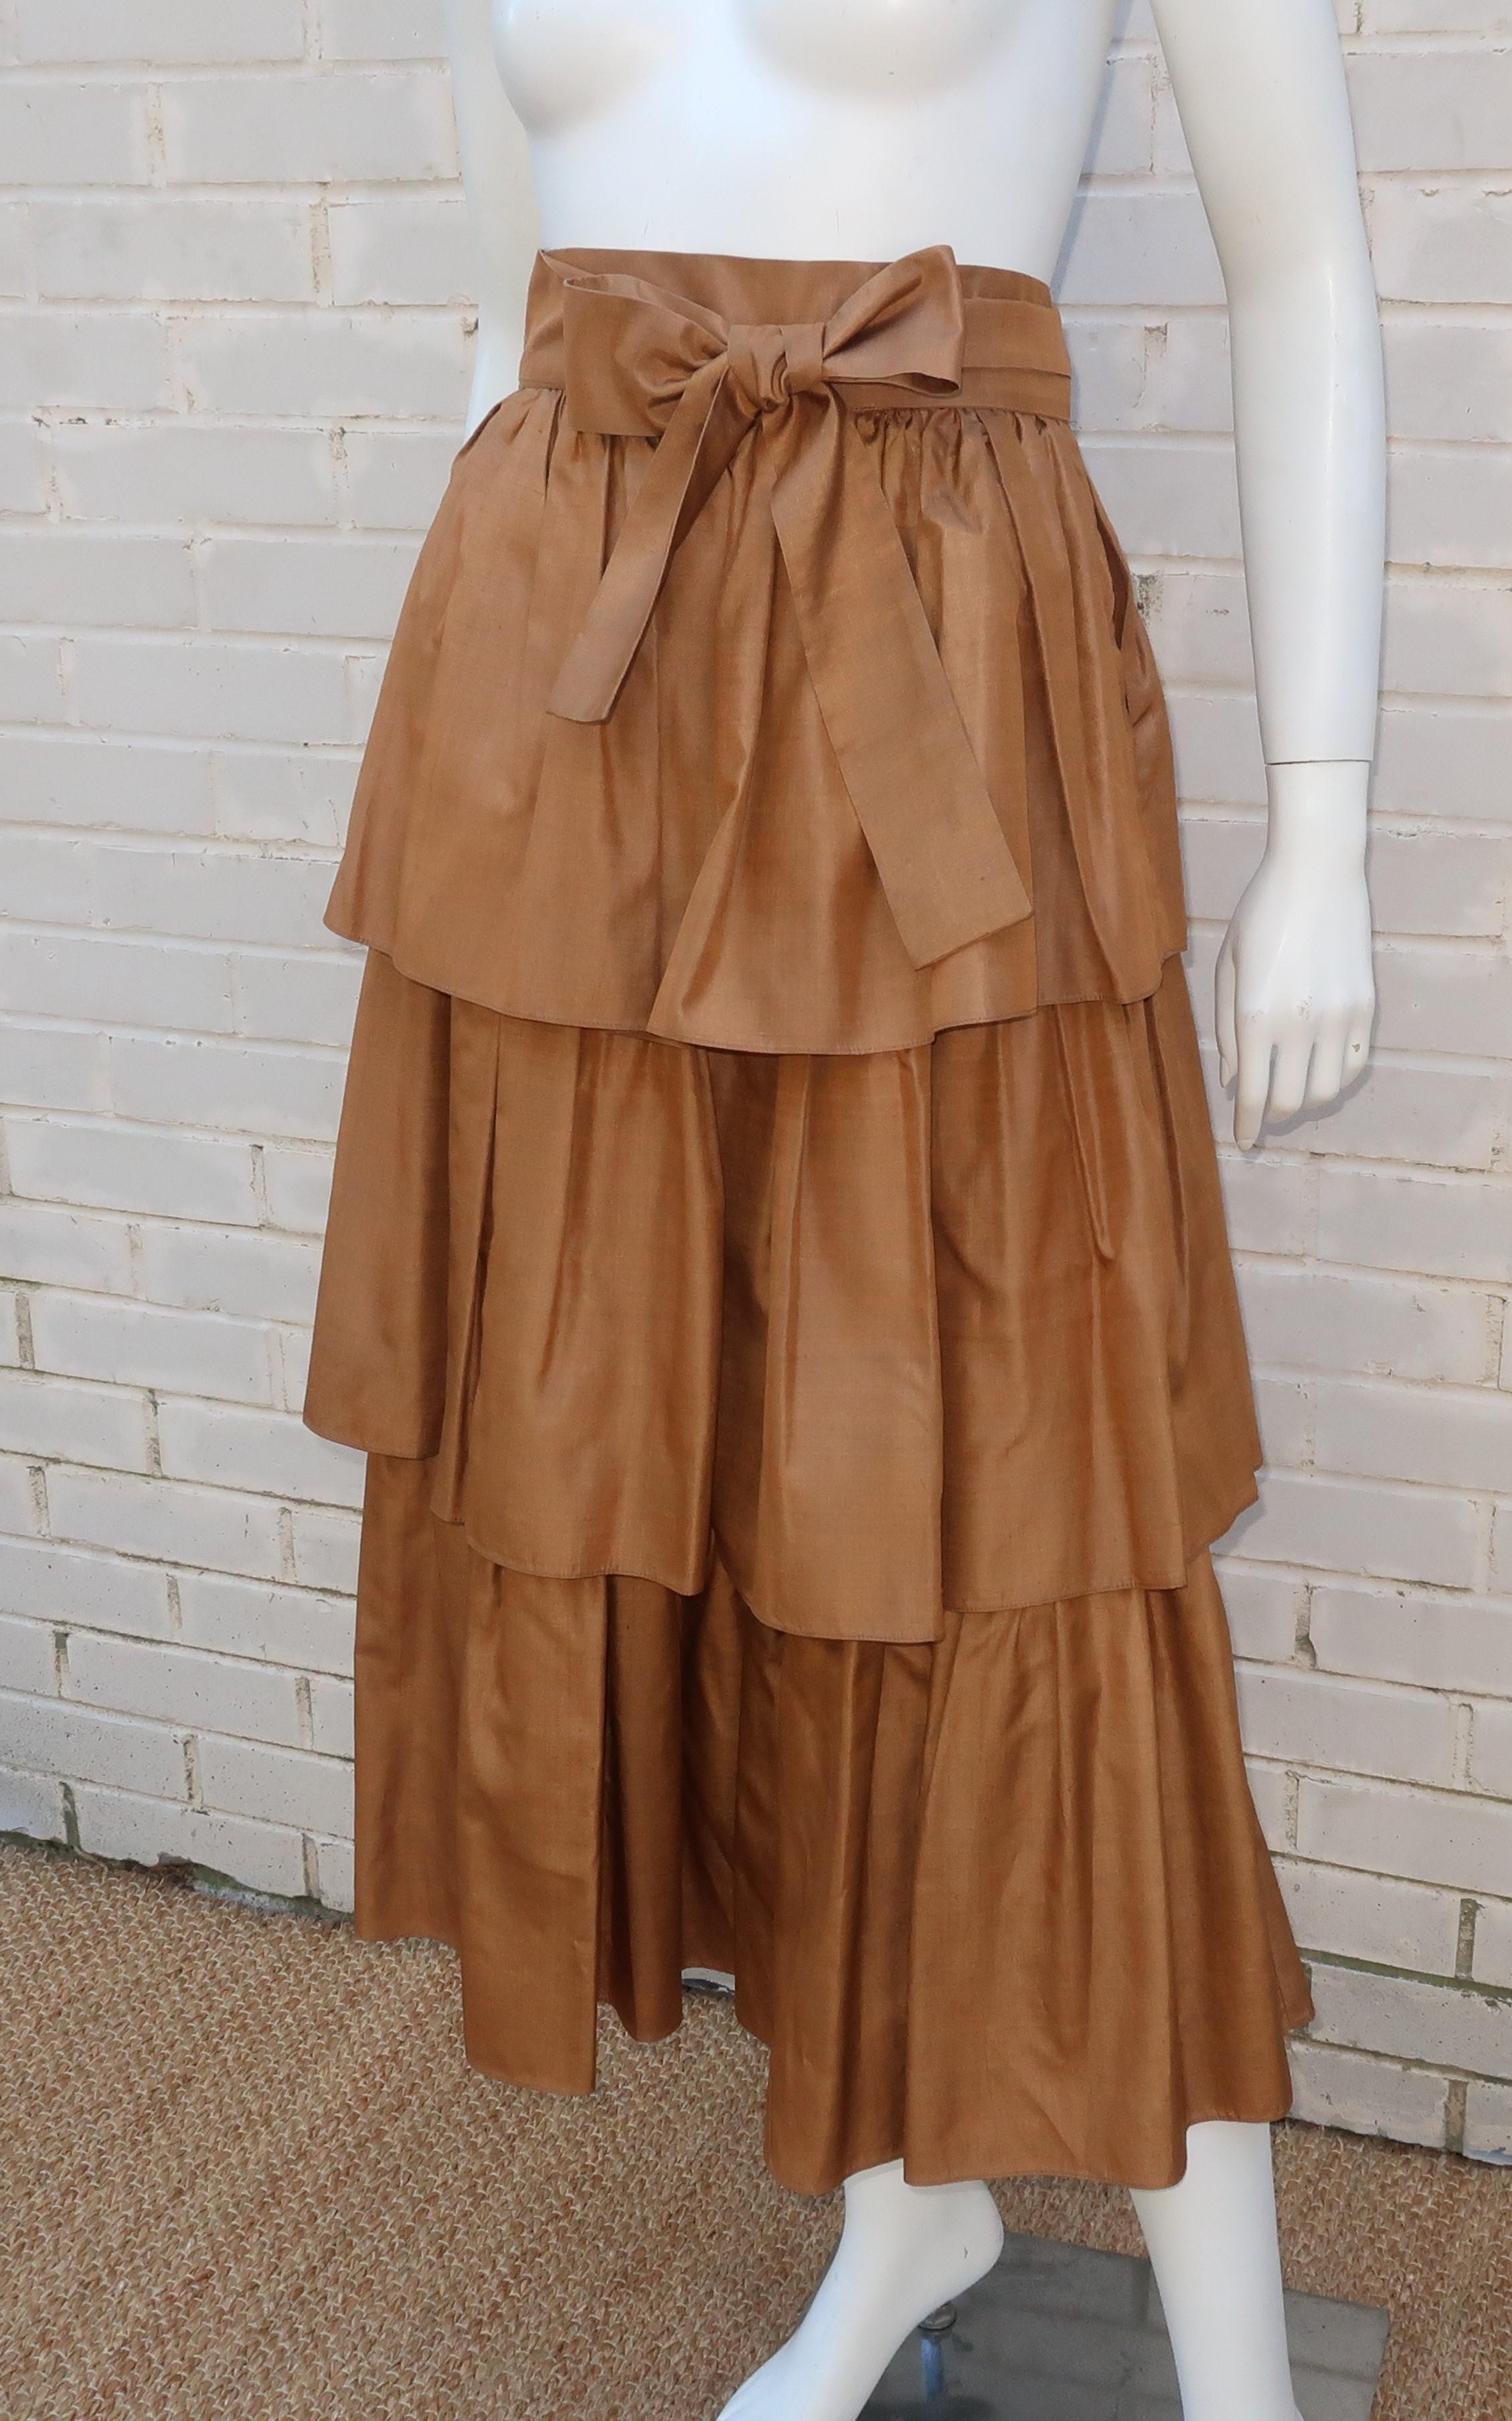 YVES SAINT LAURENT Rive Gauche Silk Tiered Peasant Skirt, 1970's For Sale 1